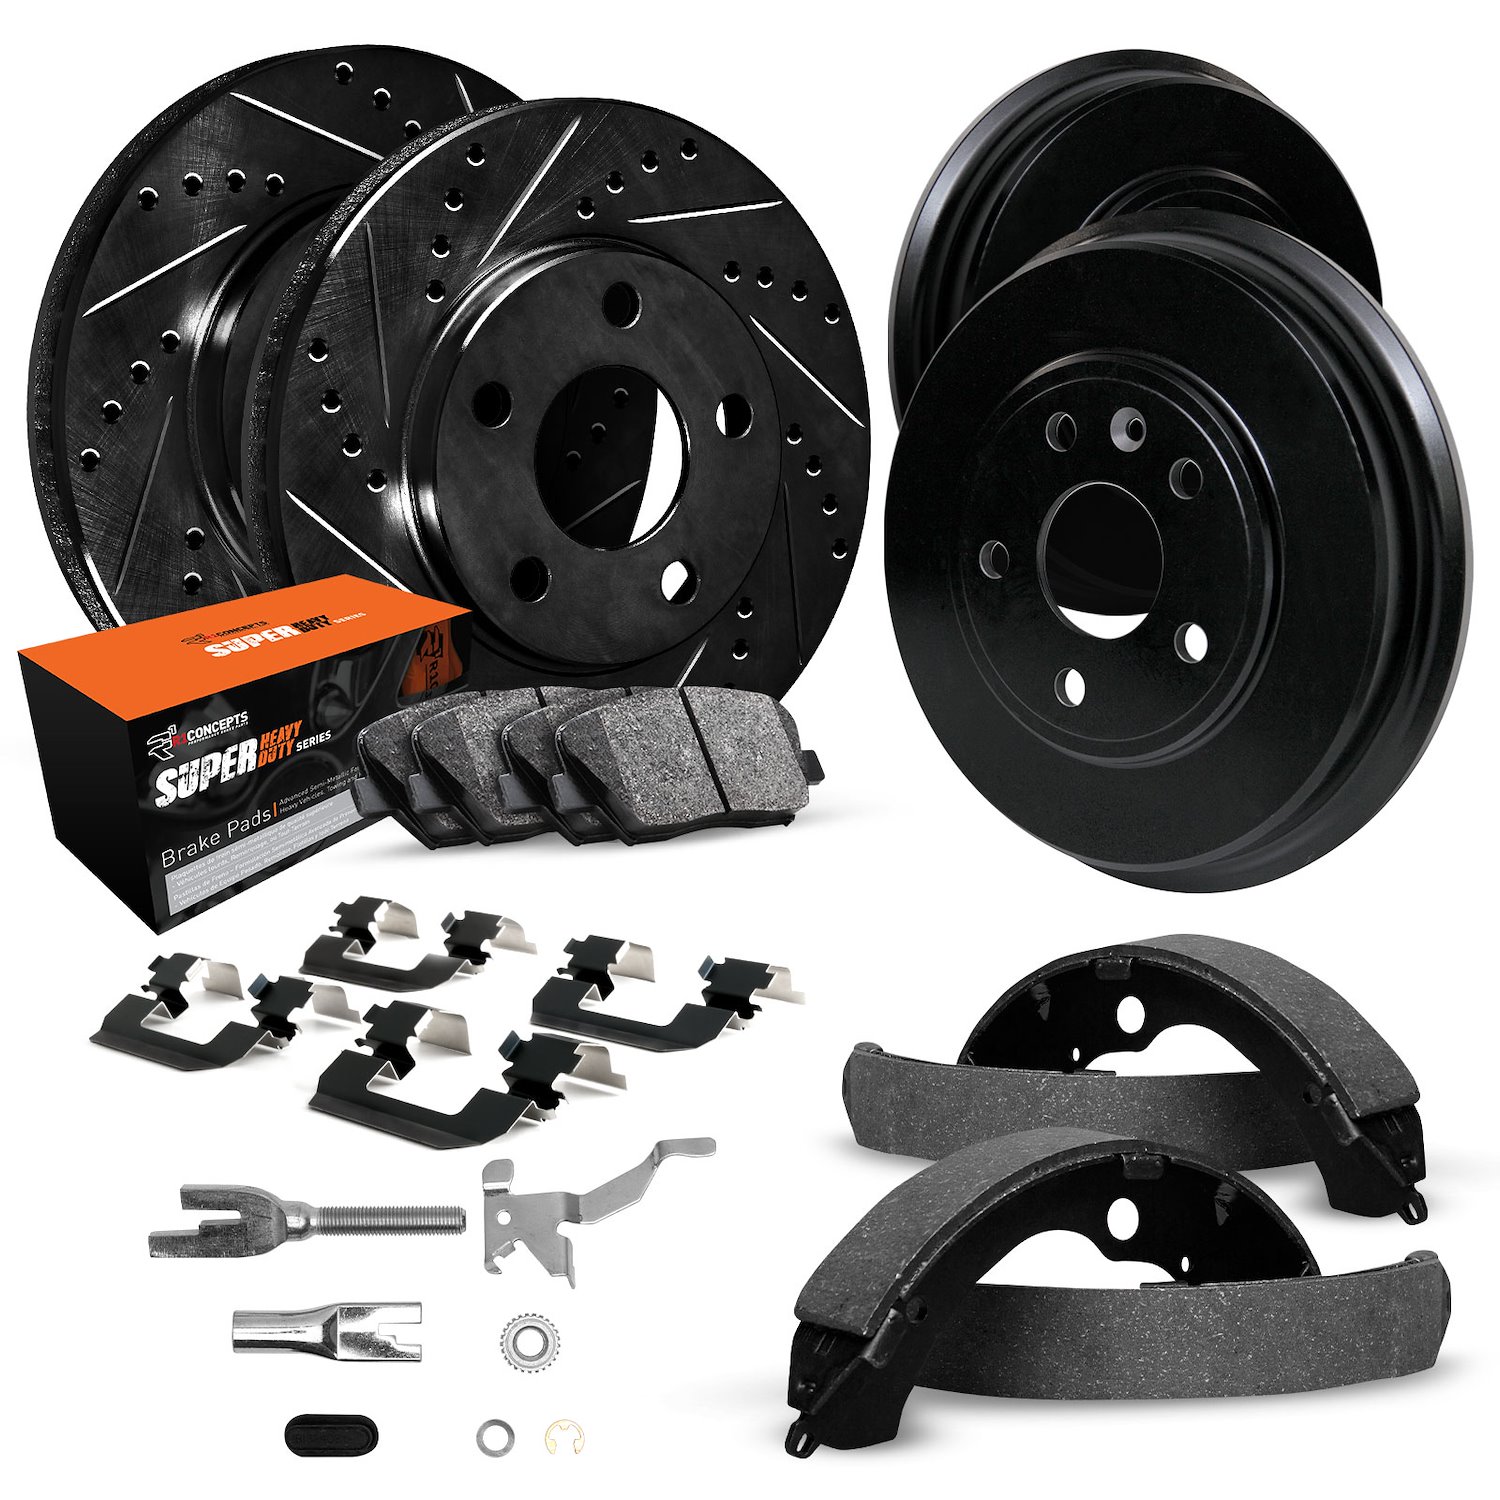 E-Line Drilled/Slotted Black Rotor & Drum Set w/Super-Duty Pads, Shoes, Hardware/Adjusters, 1997-1999 Ford/Lincoln/Mercury/Mazda